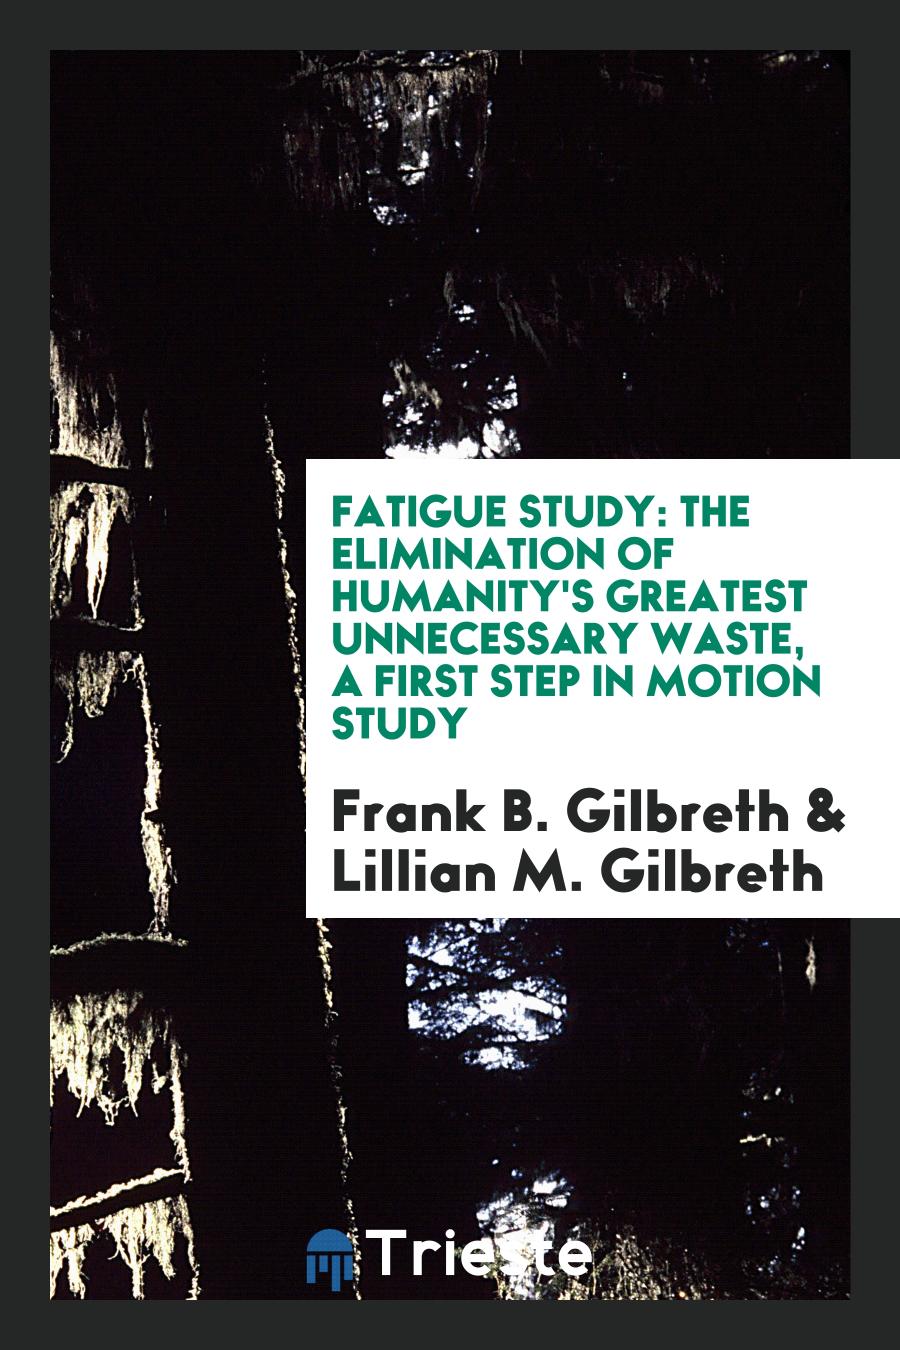 Fatigue Study: The Elimination of Humanity's Greatest Unnecessary Waste, a First Step in Motion Study